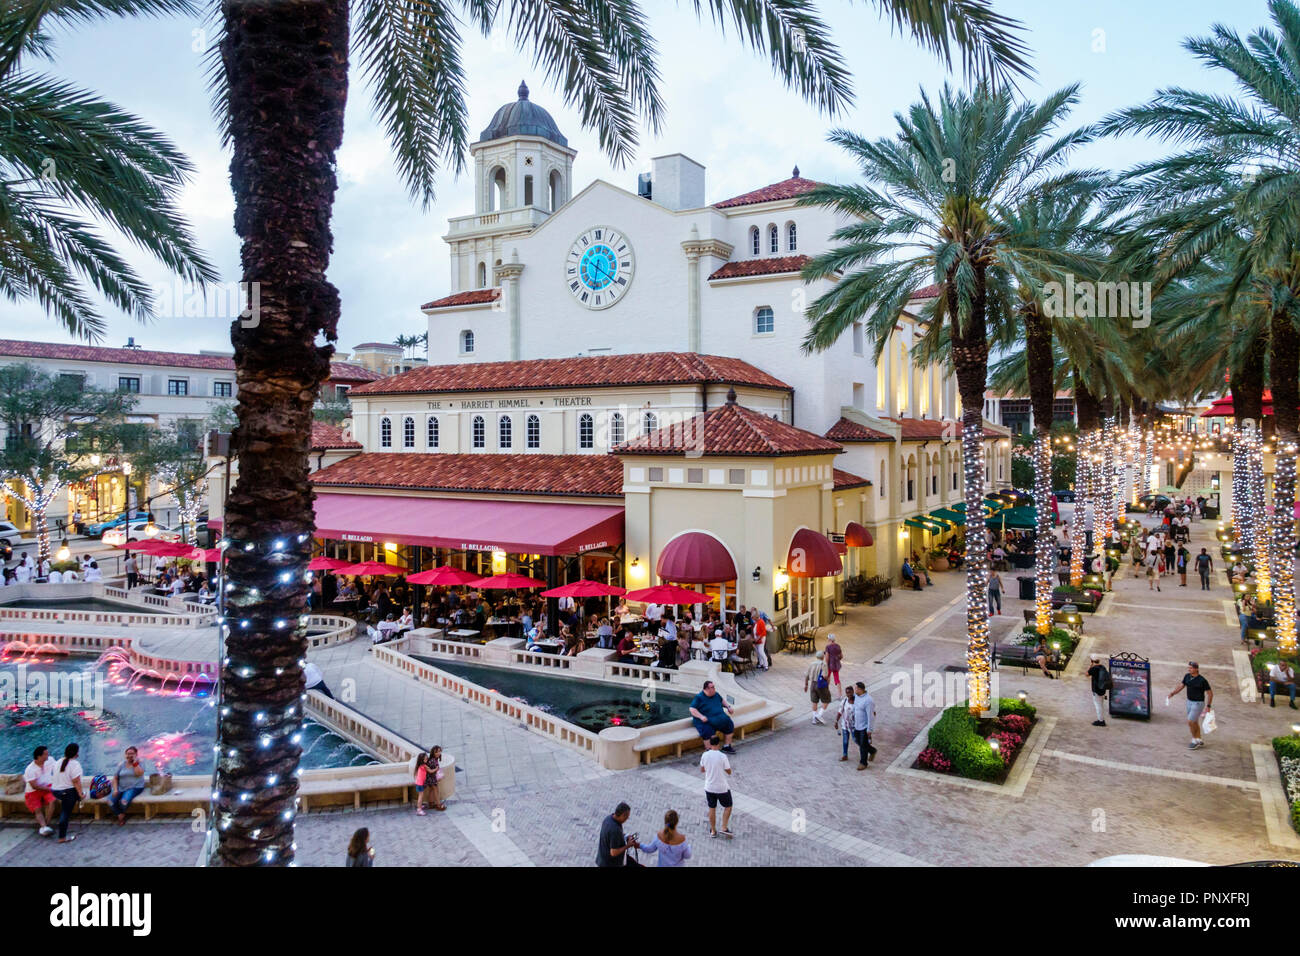 West Palm Beach Florida,The Square formerly CityPlace,shopping shopper shoppers shop shops market markets marketplace buying selling,retail store stor Stock Photo